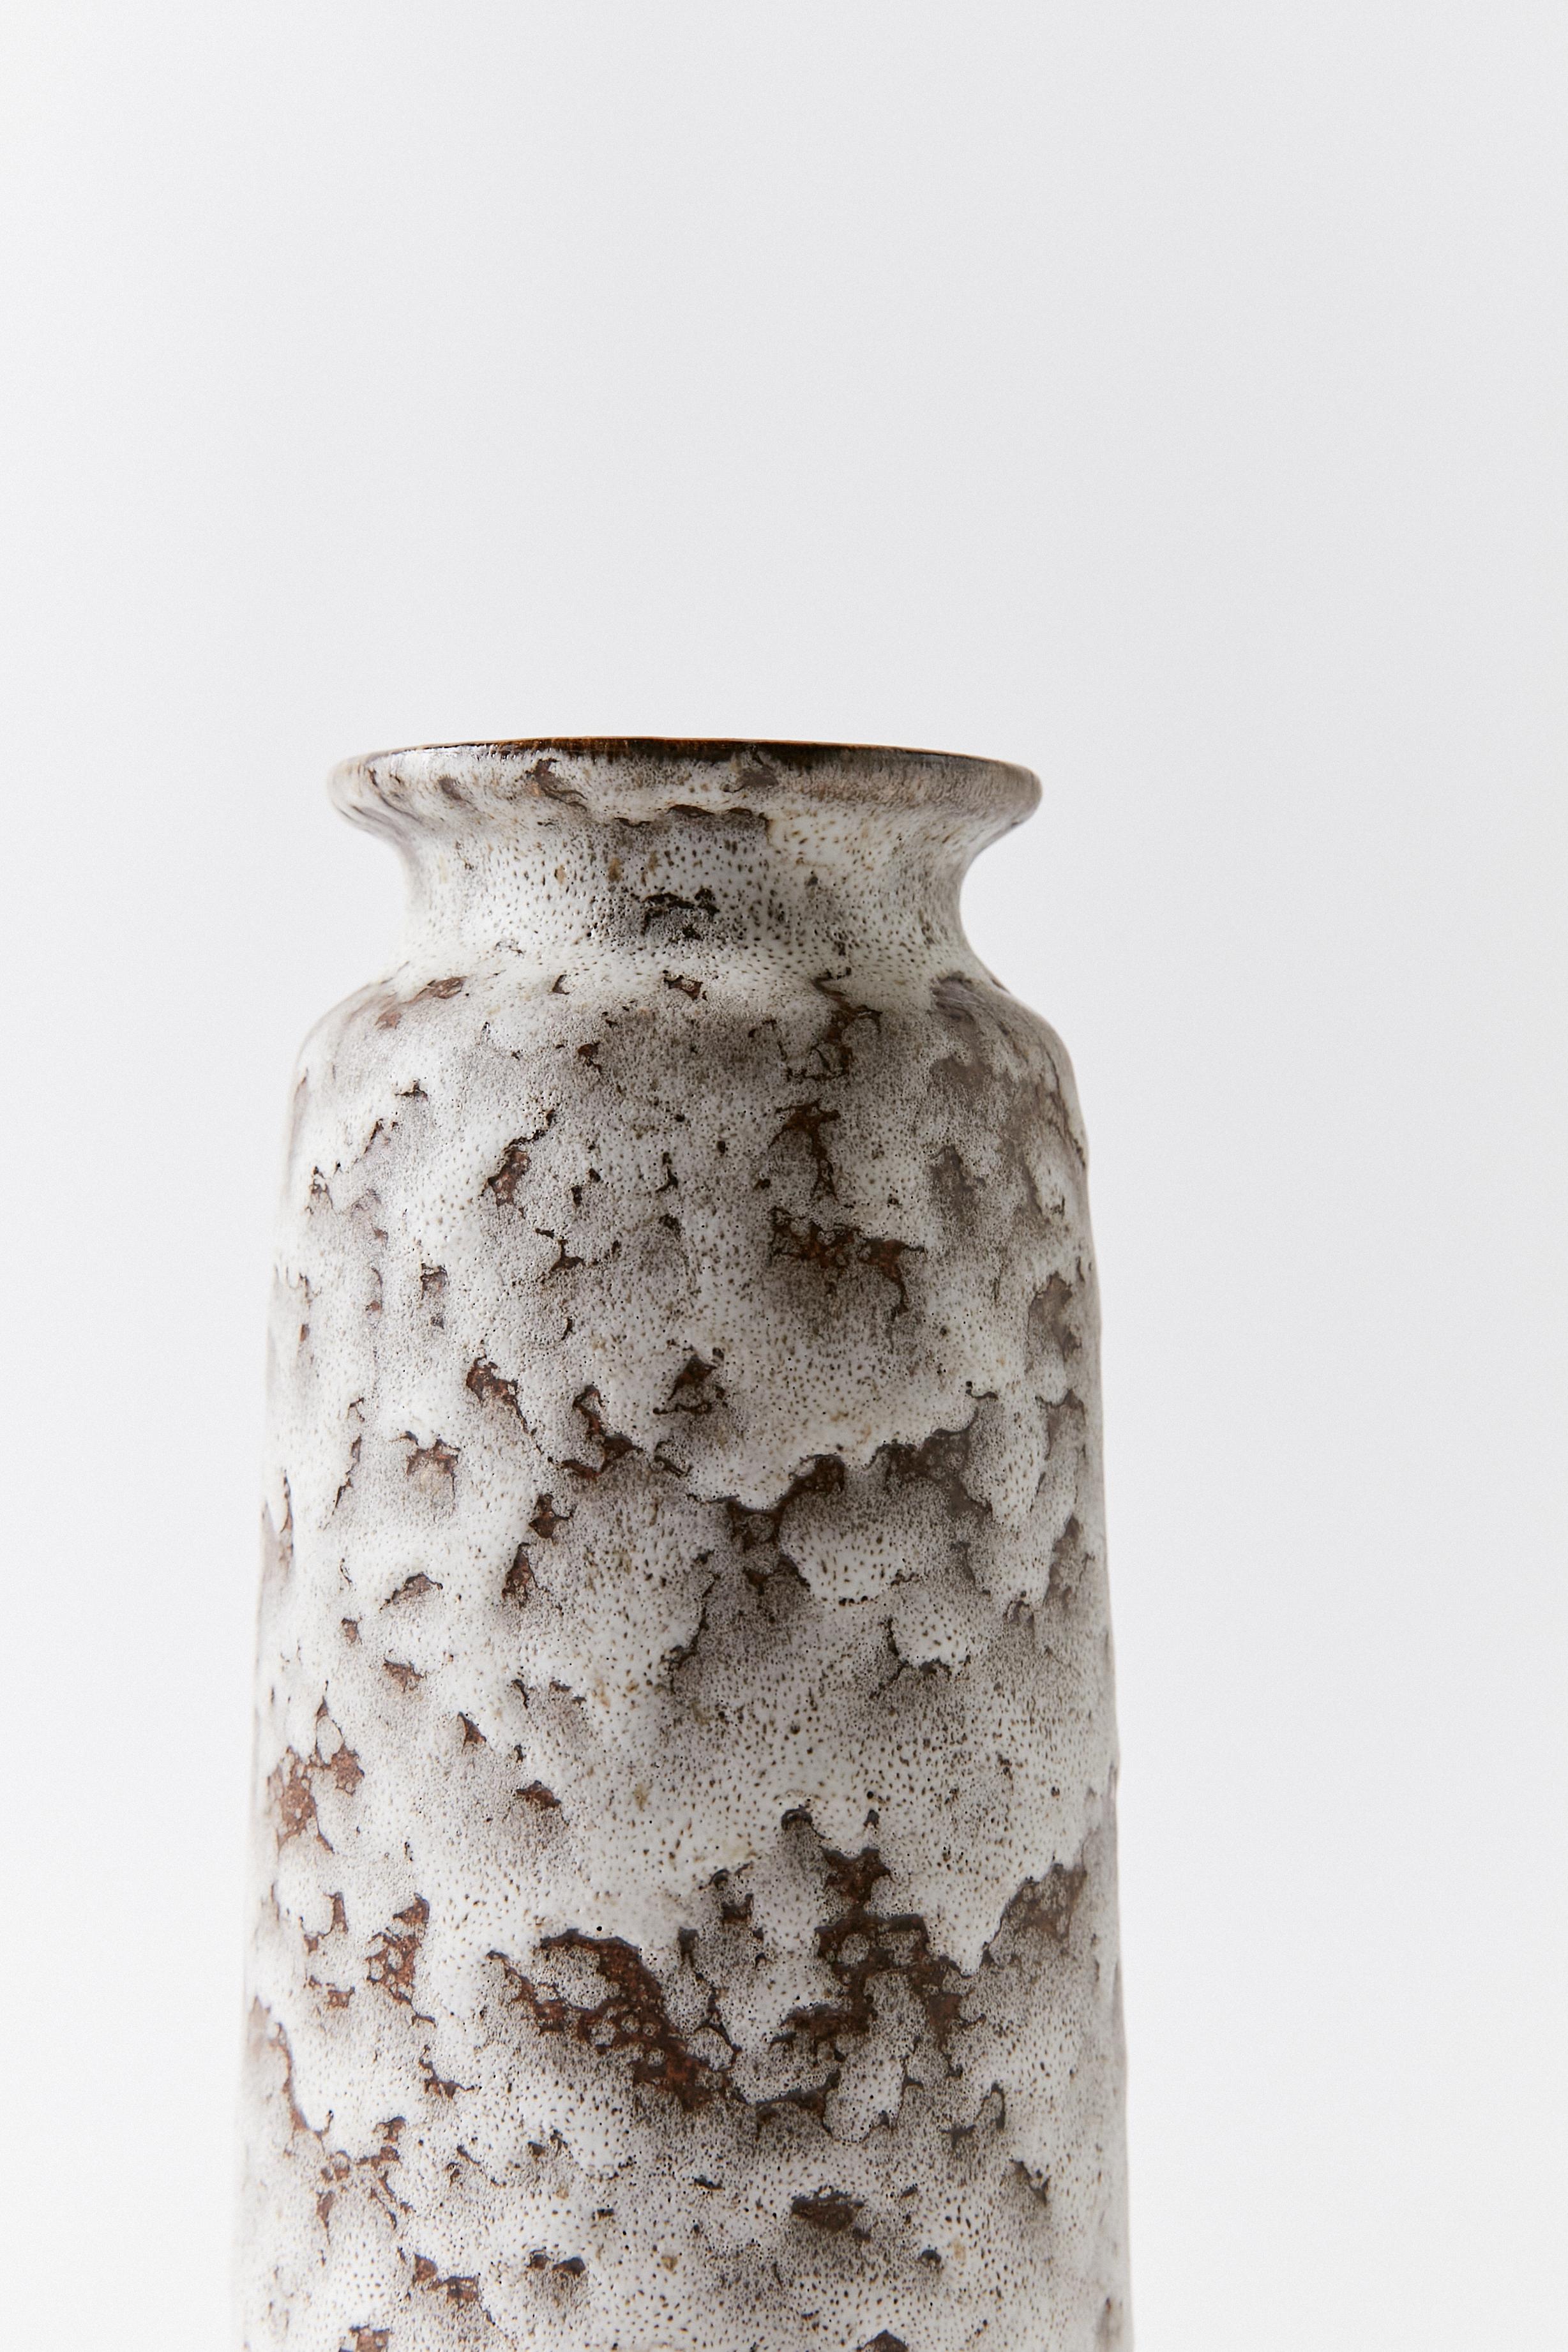 Glazed Fat Lava Vase with White Textured Finish, West Germany, 1960s For Sale